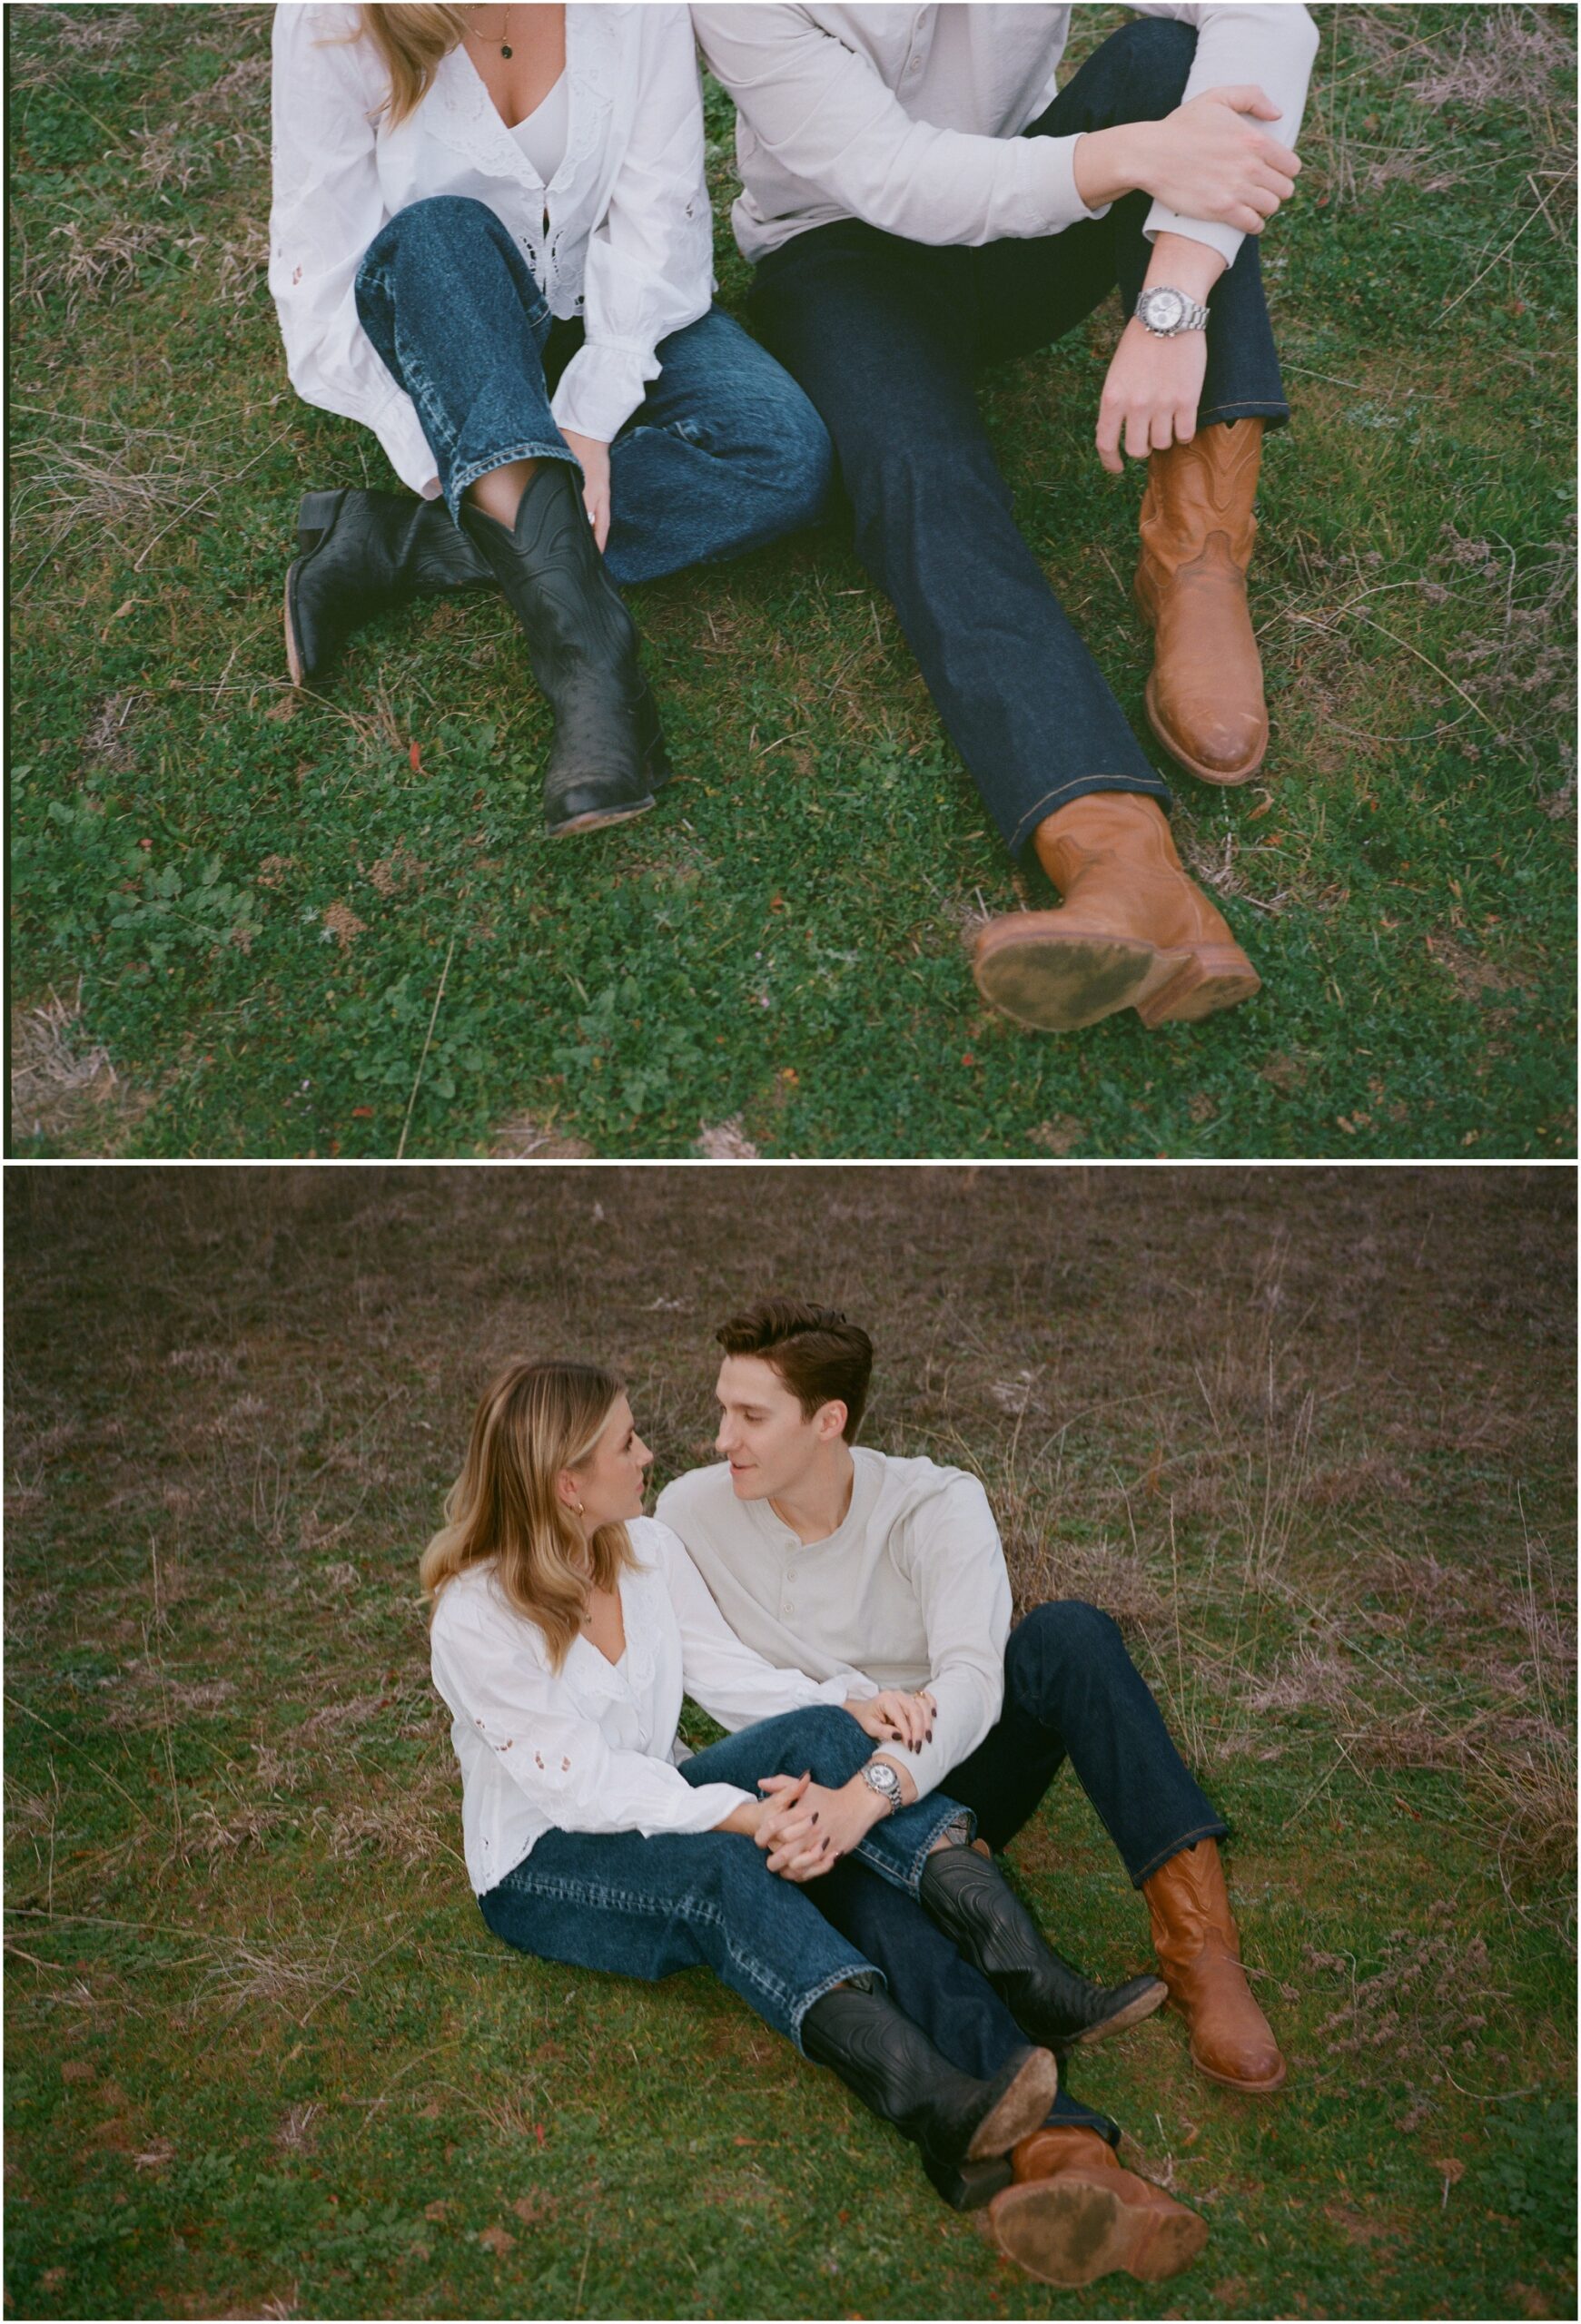 couple together in tecovas boots in fort worth texas engagement session on 120mm film